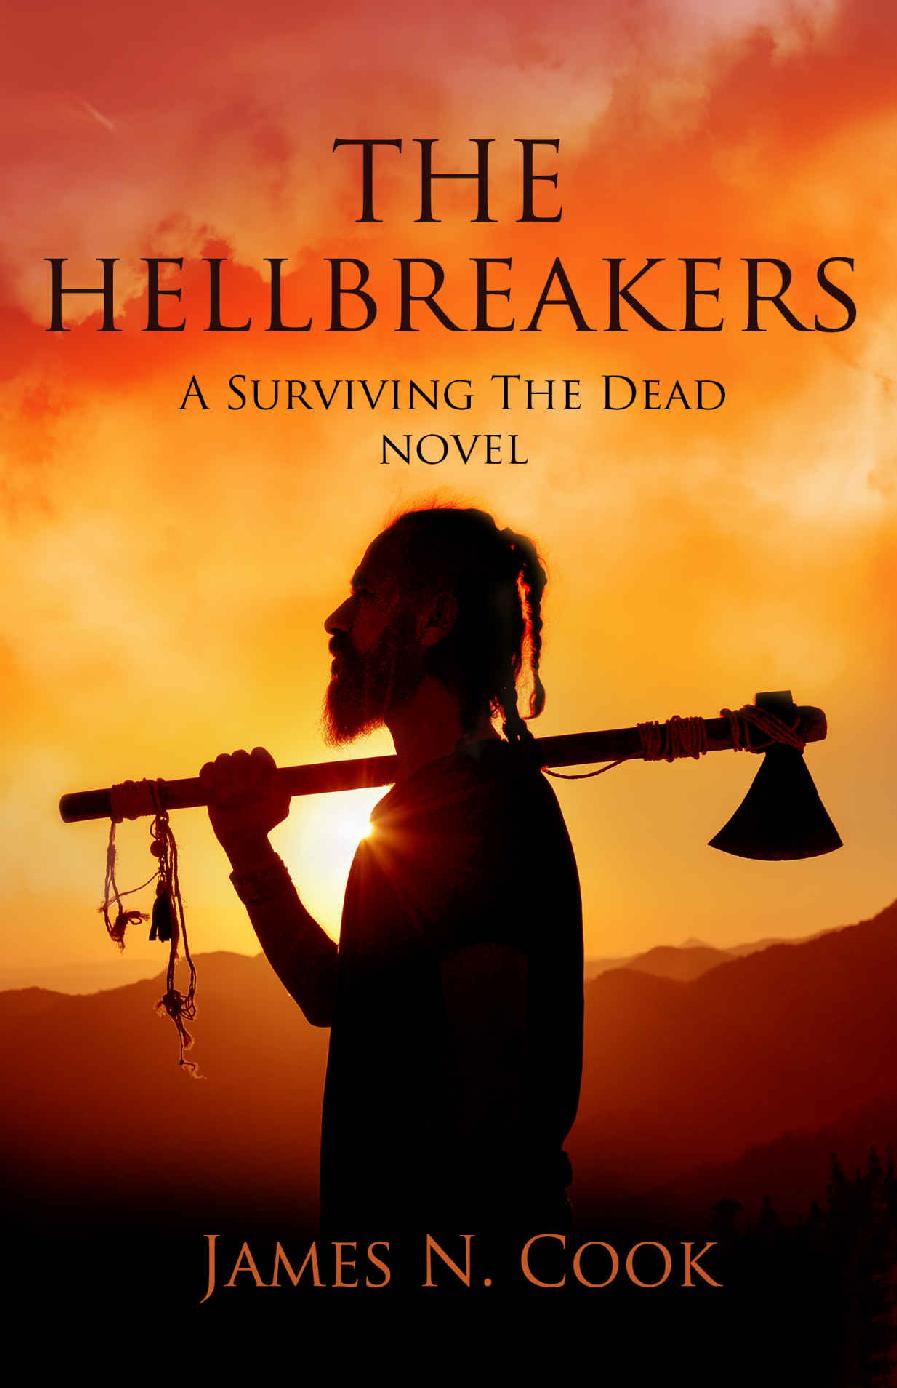 The Hellbreakers